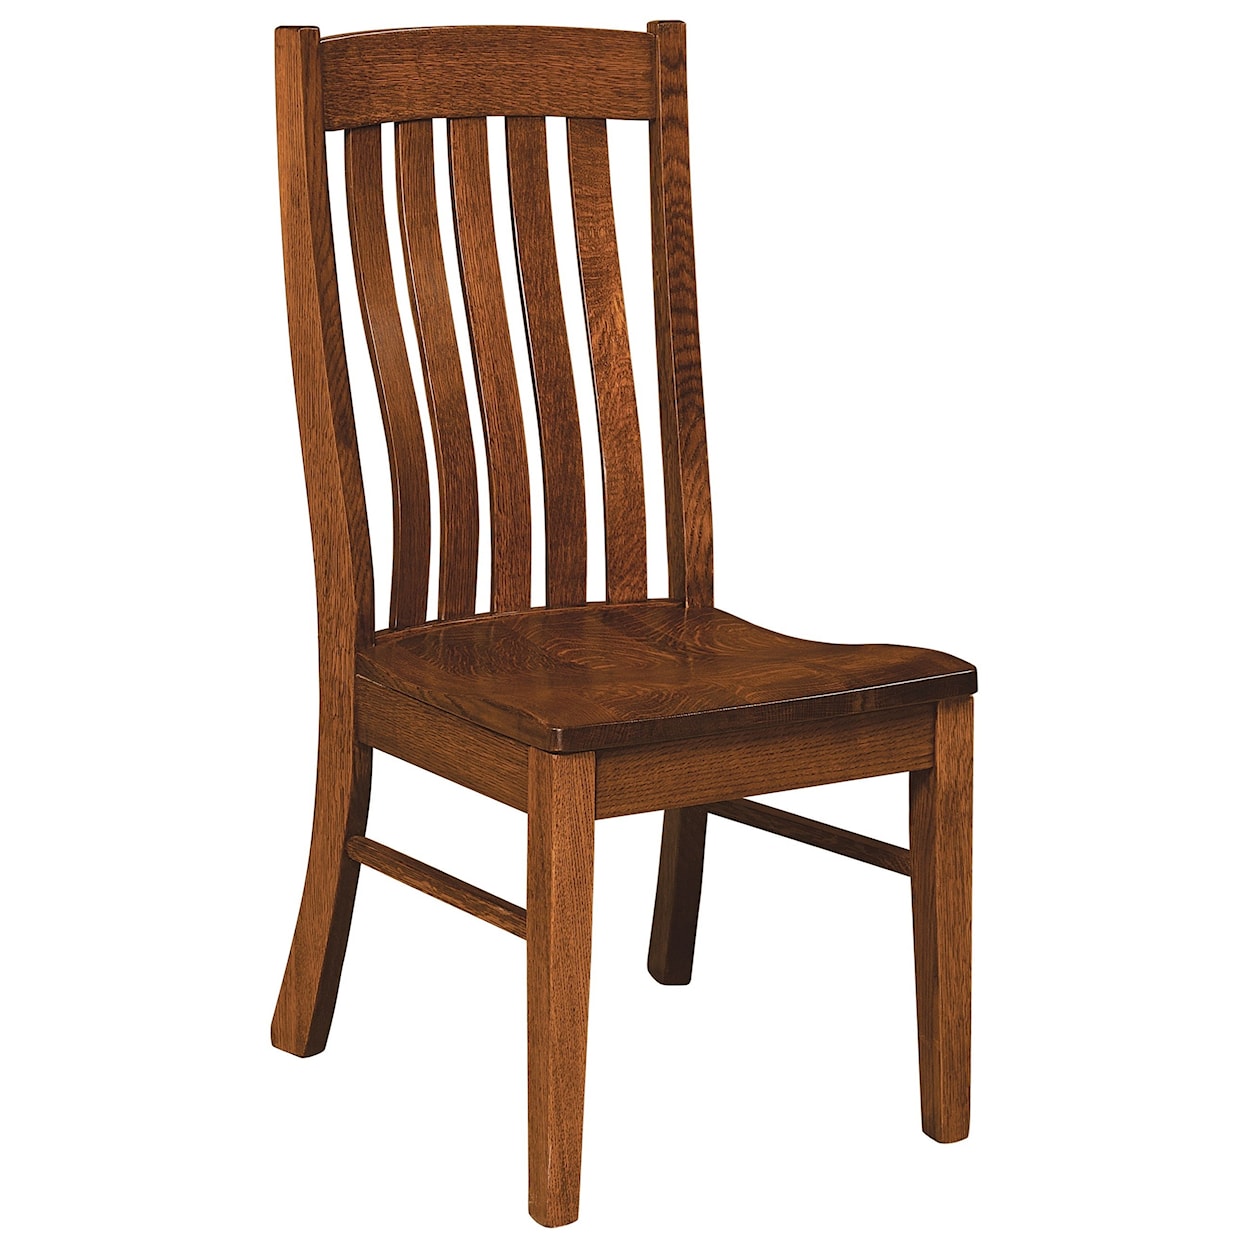 F&N Woodworking Houghton Side Chair - Wood Seat